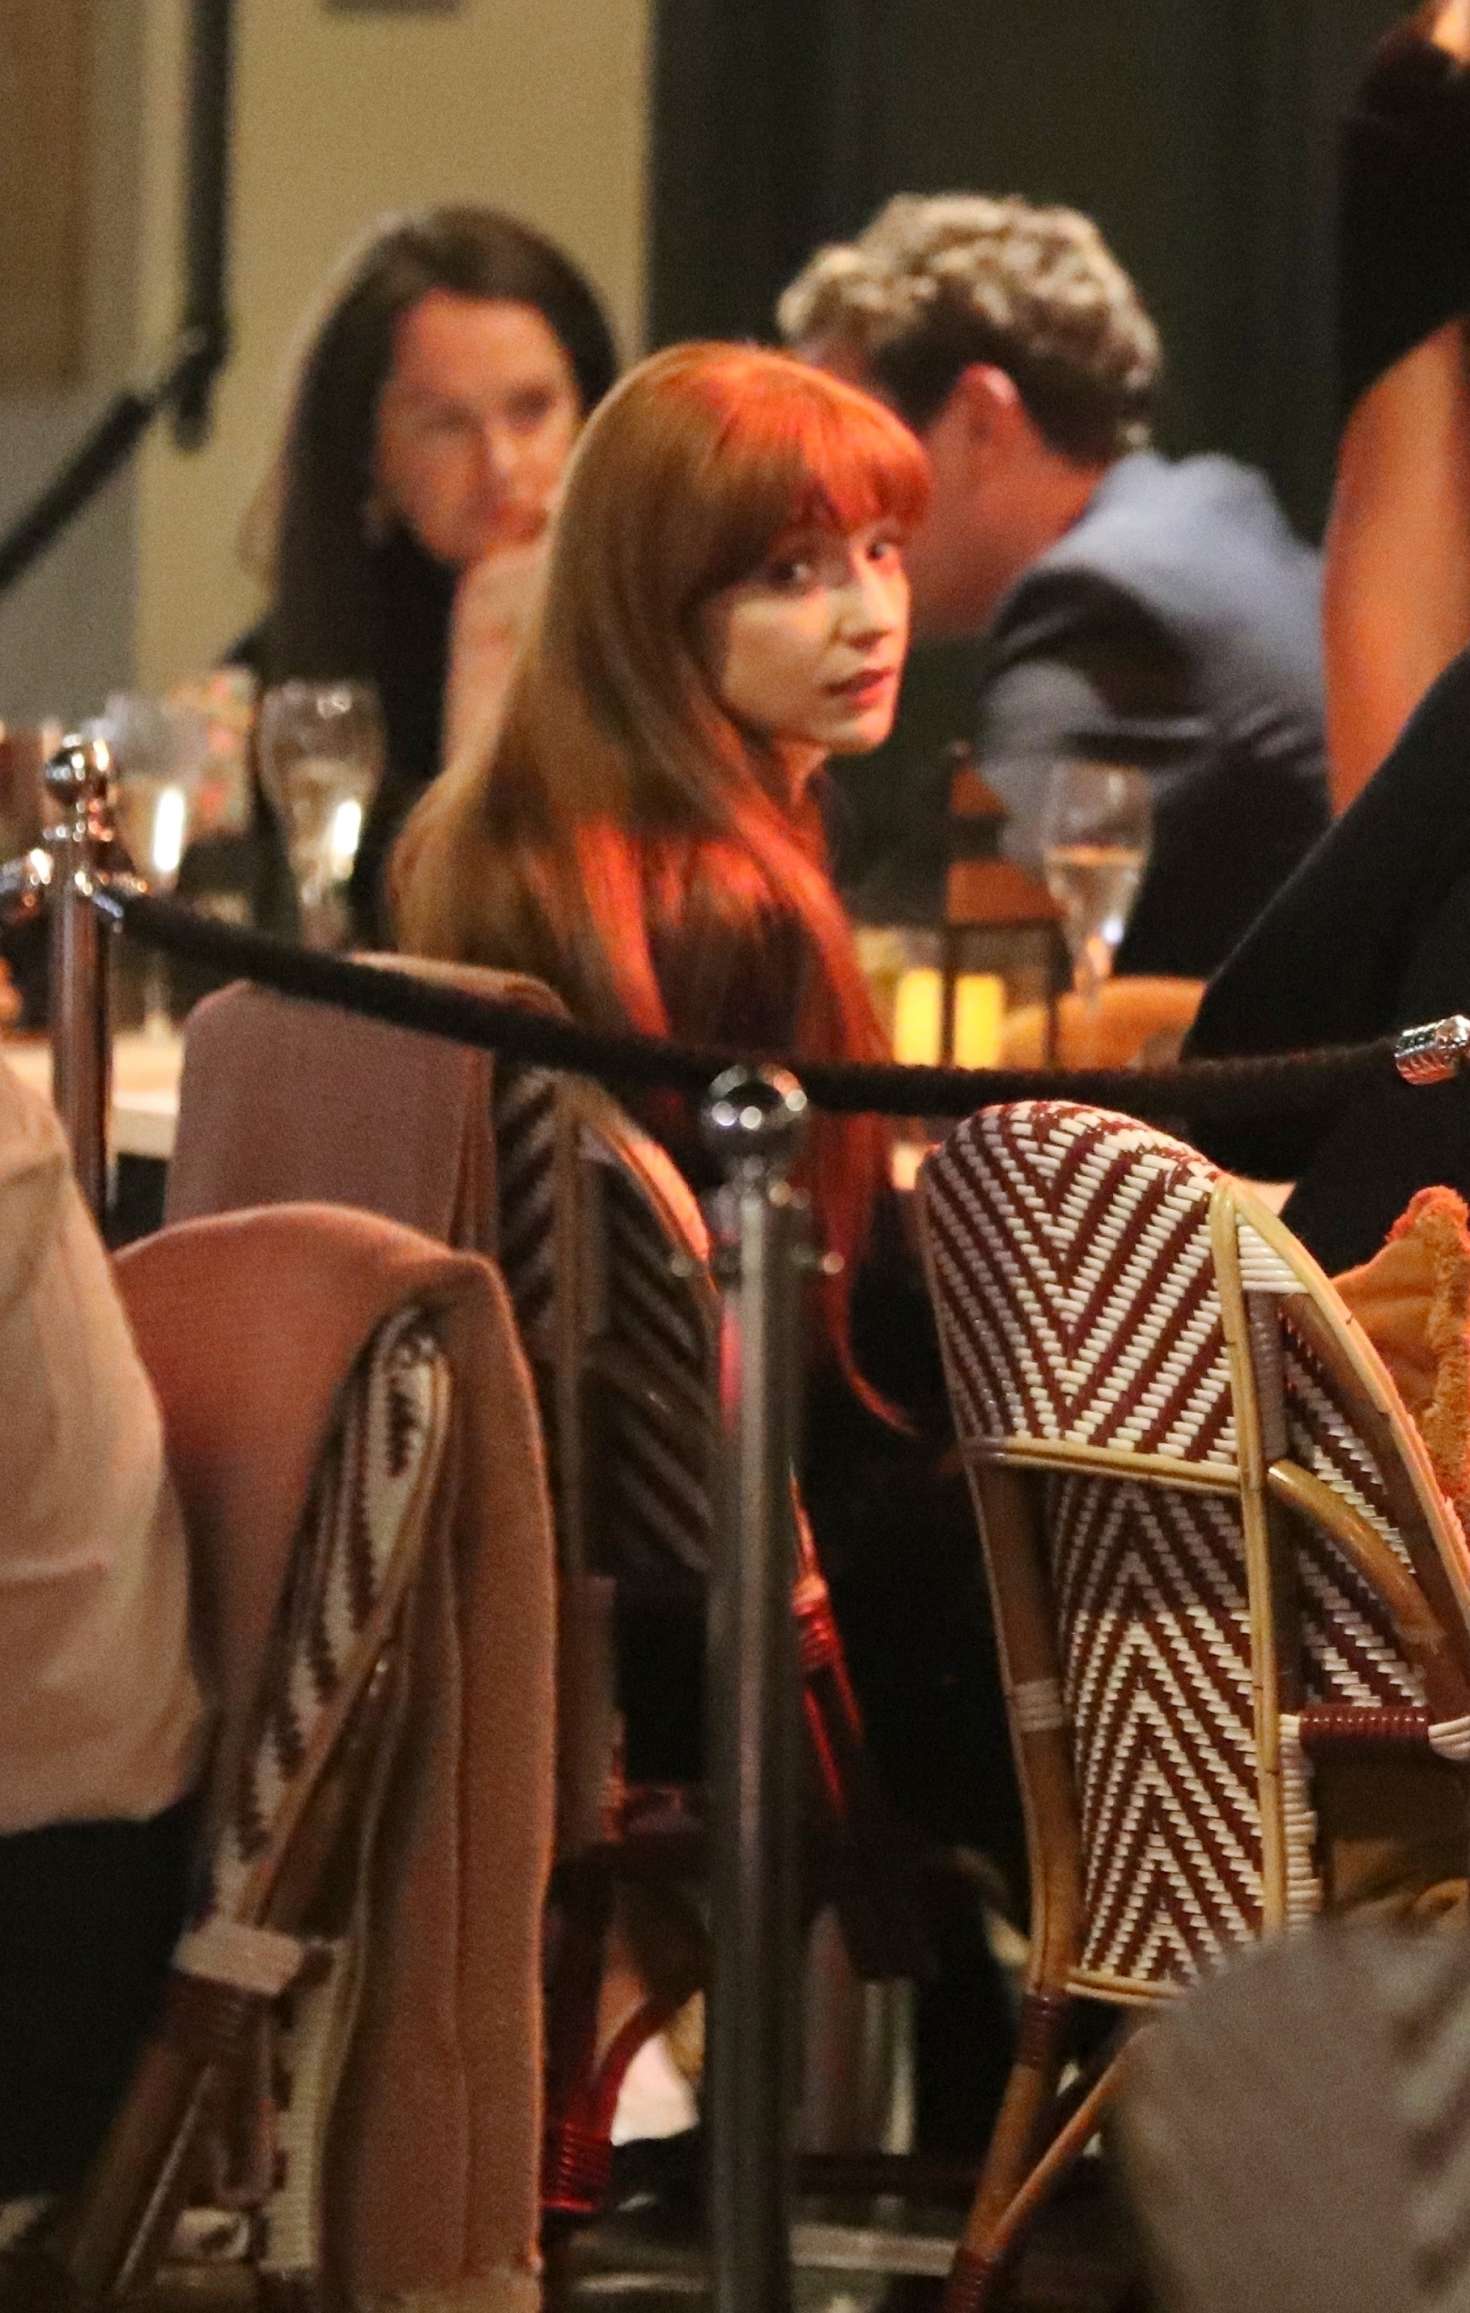 Nicola Roberts at the Harryâ€™s Bar launch in London